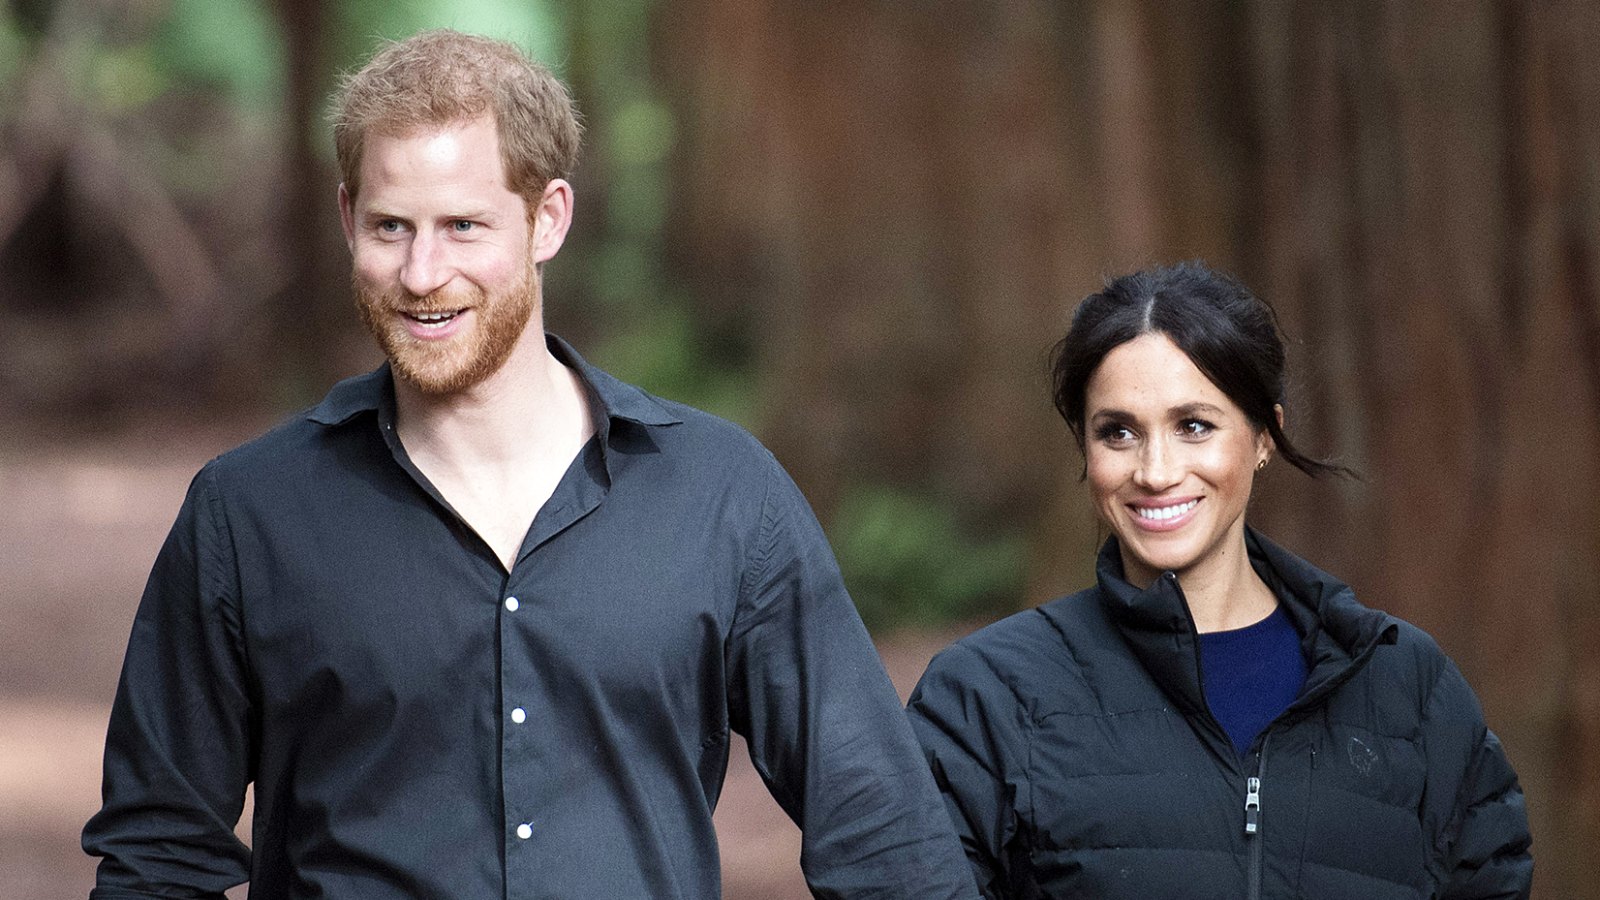 Prince Harry and Meghan Markle Send Thanks to UK Charity for Distributing Meals During the COVID-19 Pandemic